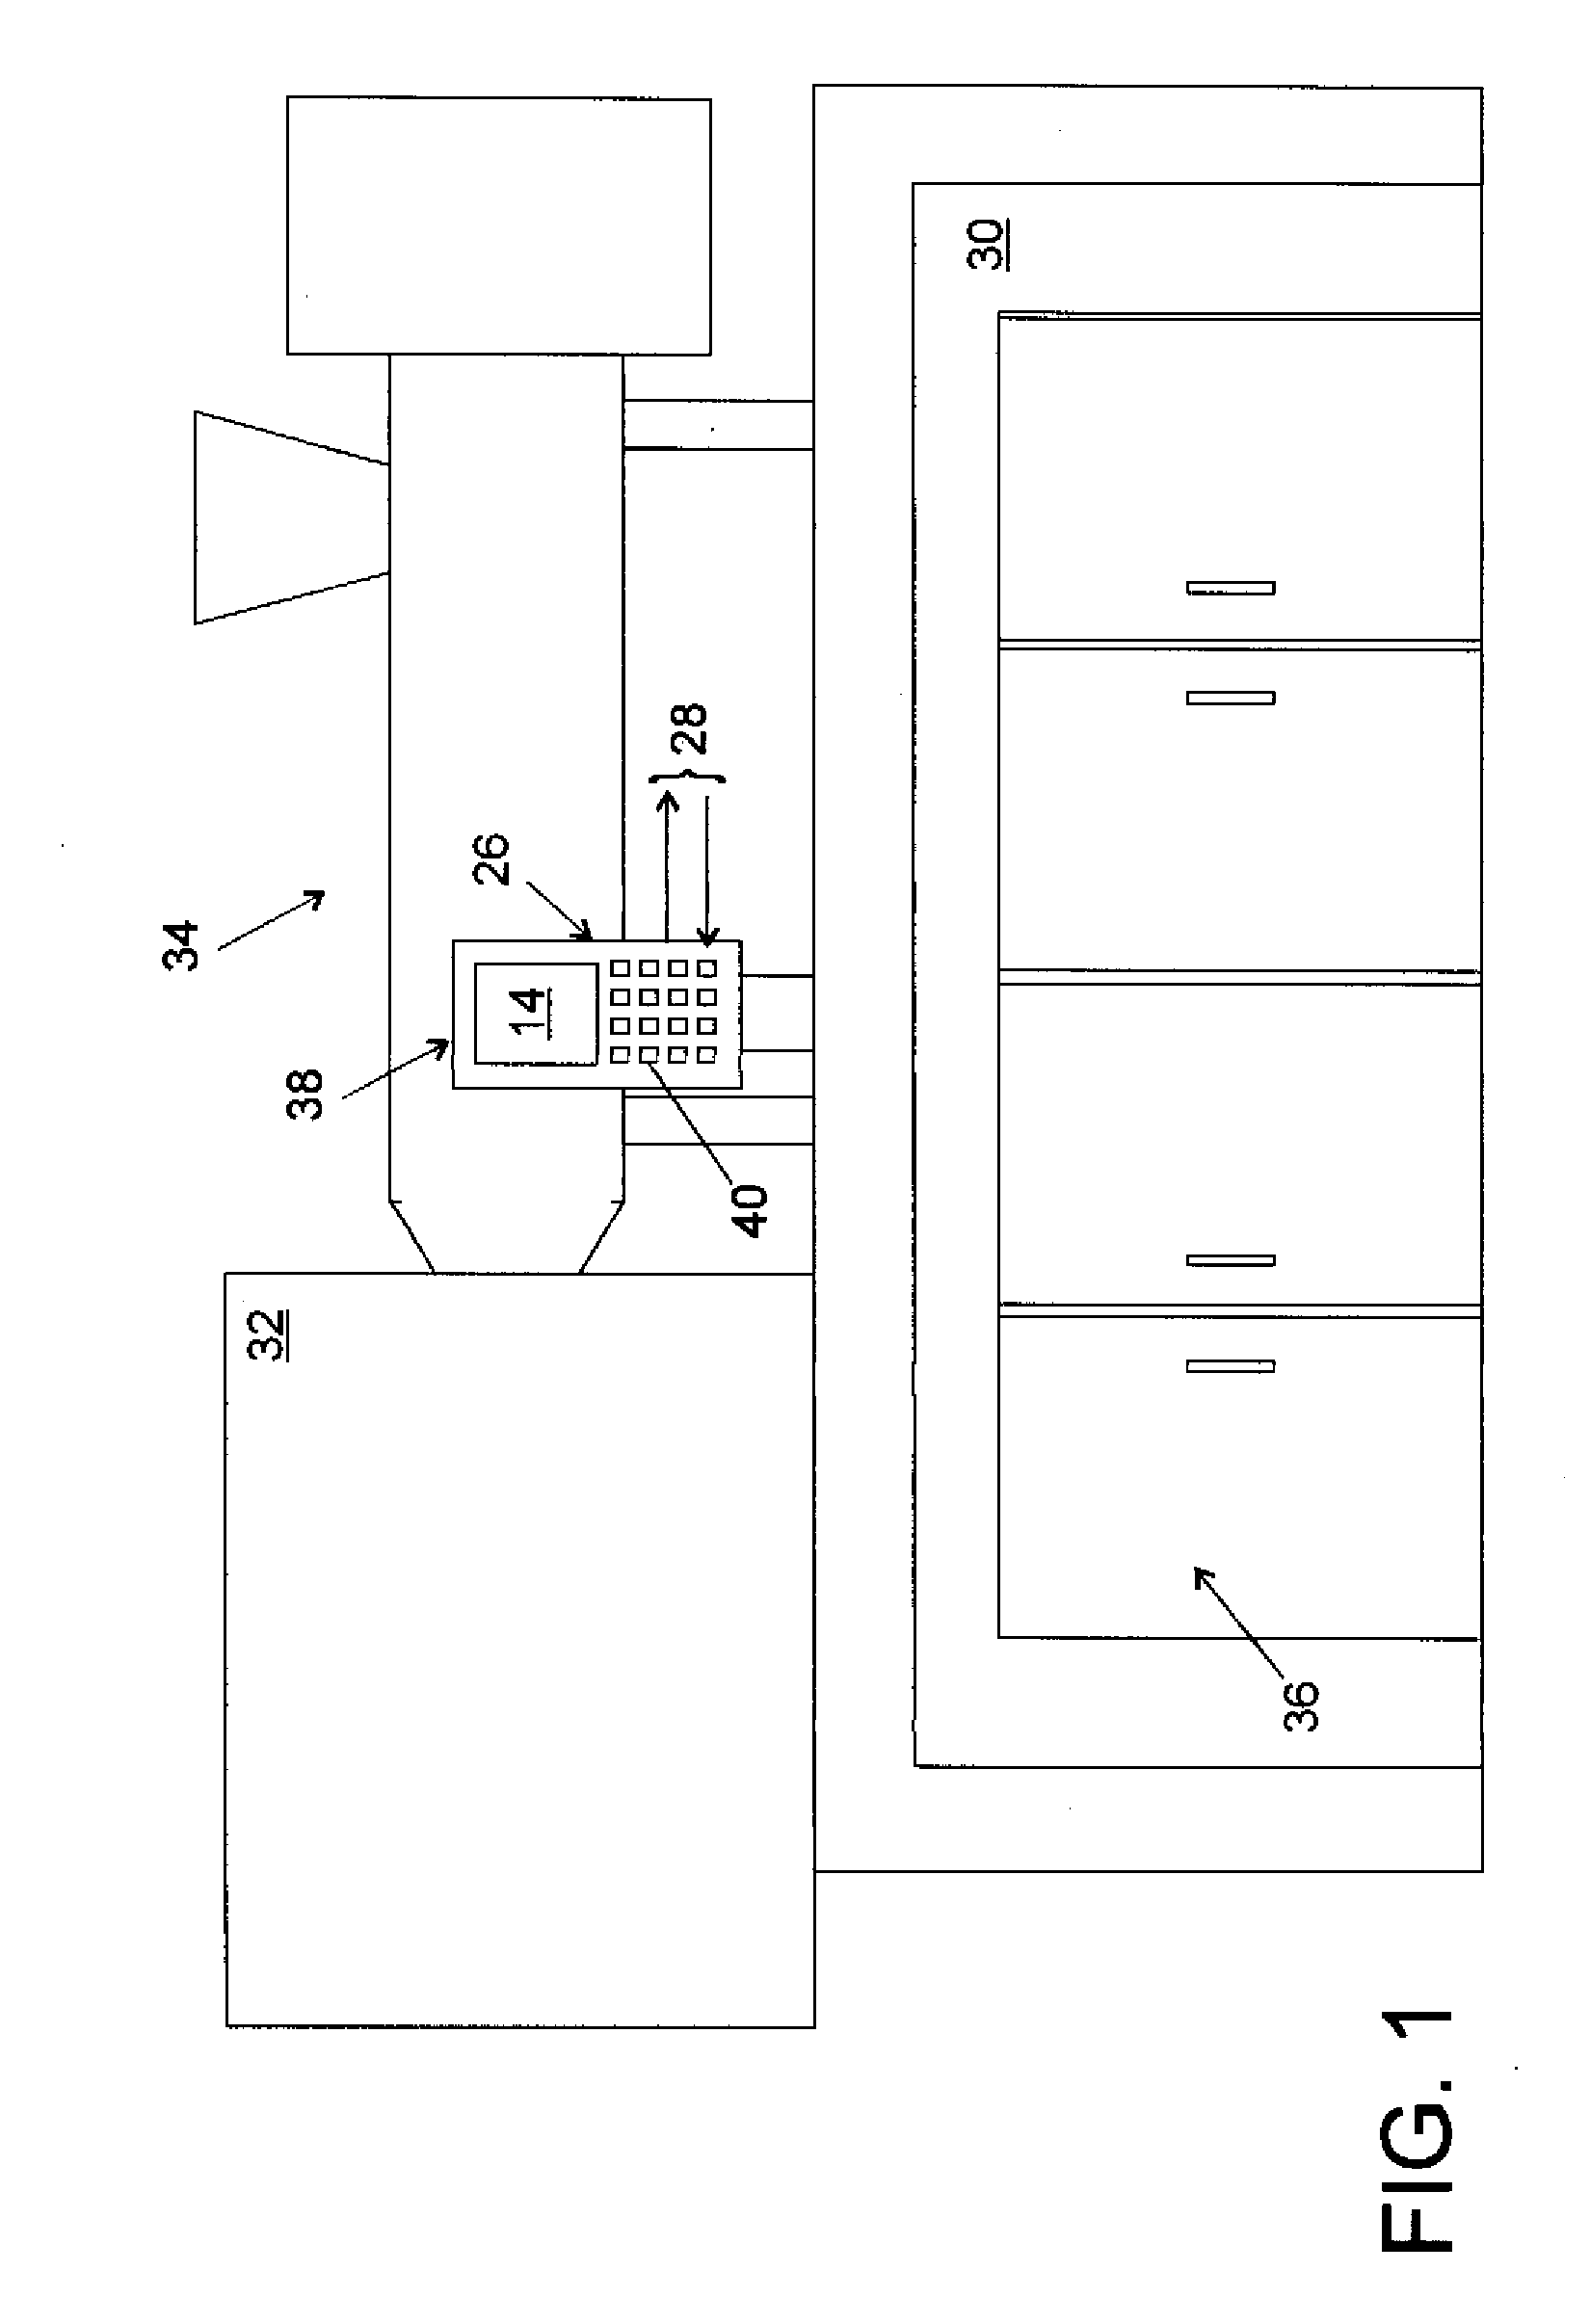 Water-cooled control device for a plastics processing machine